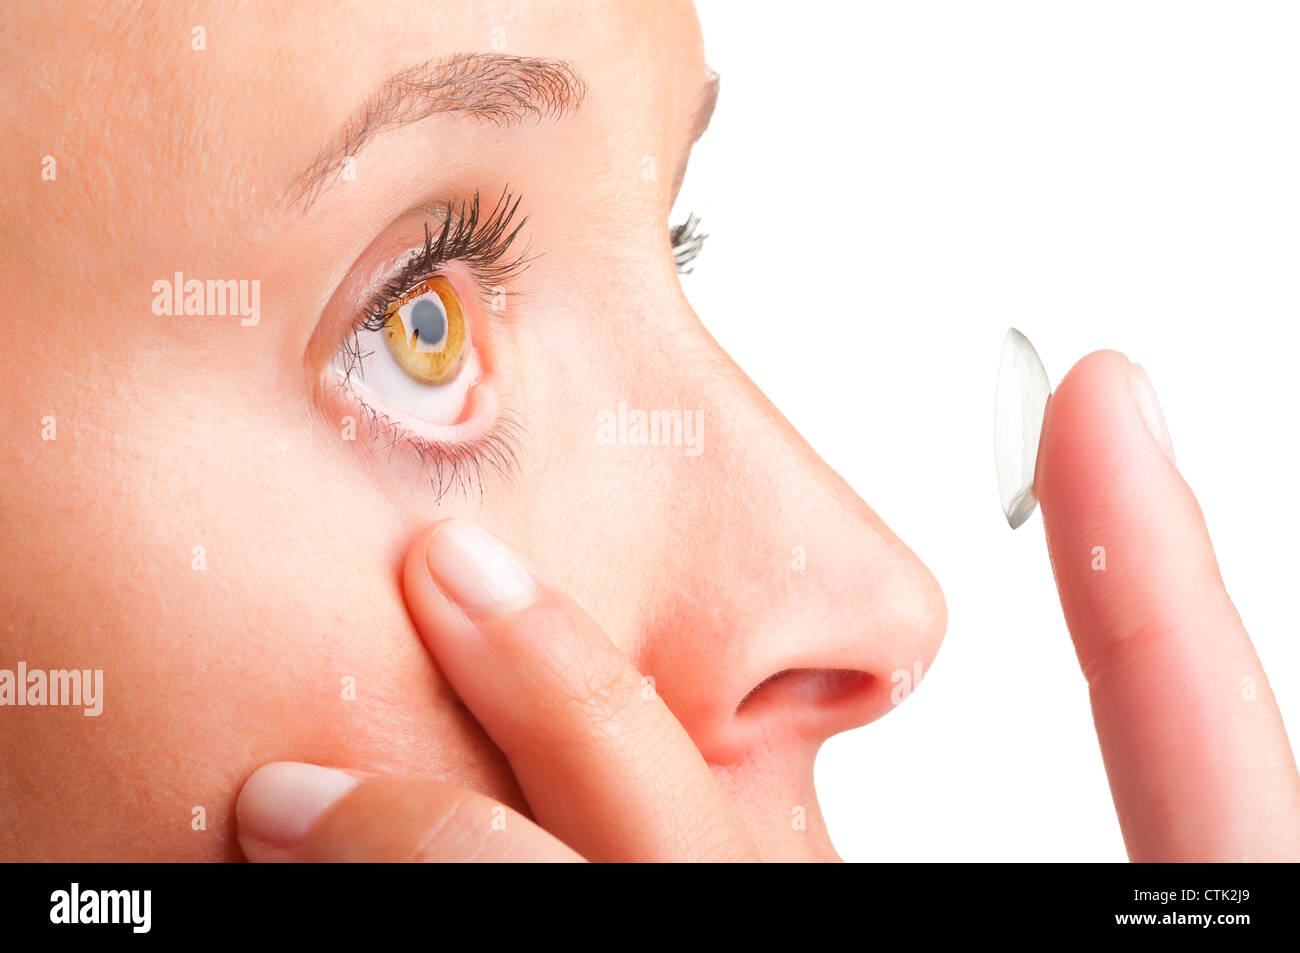 Closeup of a woman inserting a contact lens in her eye Stock Photo